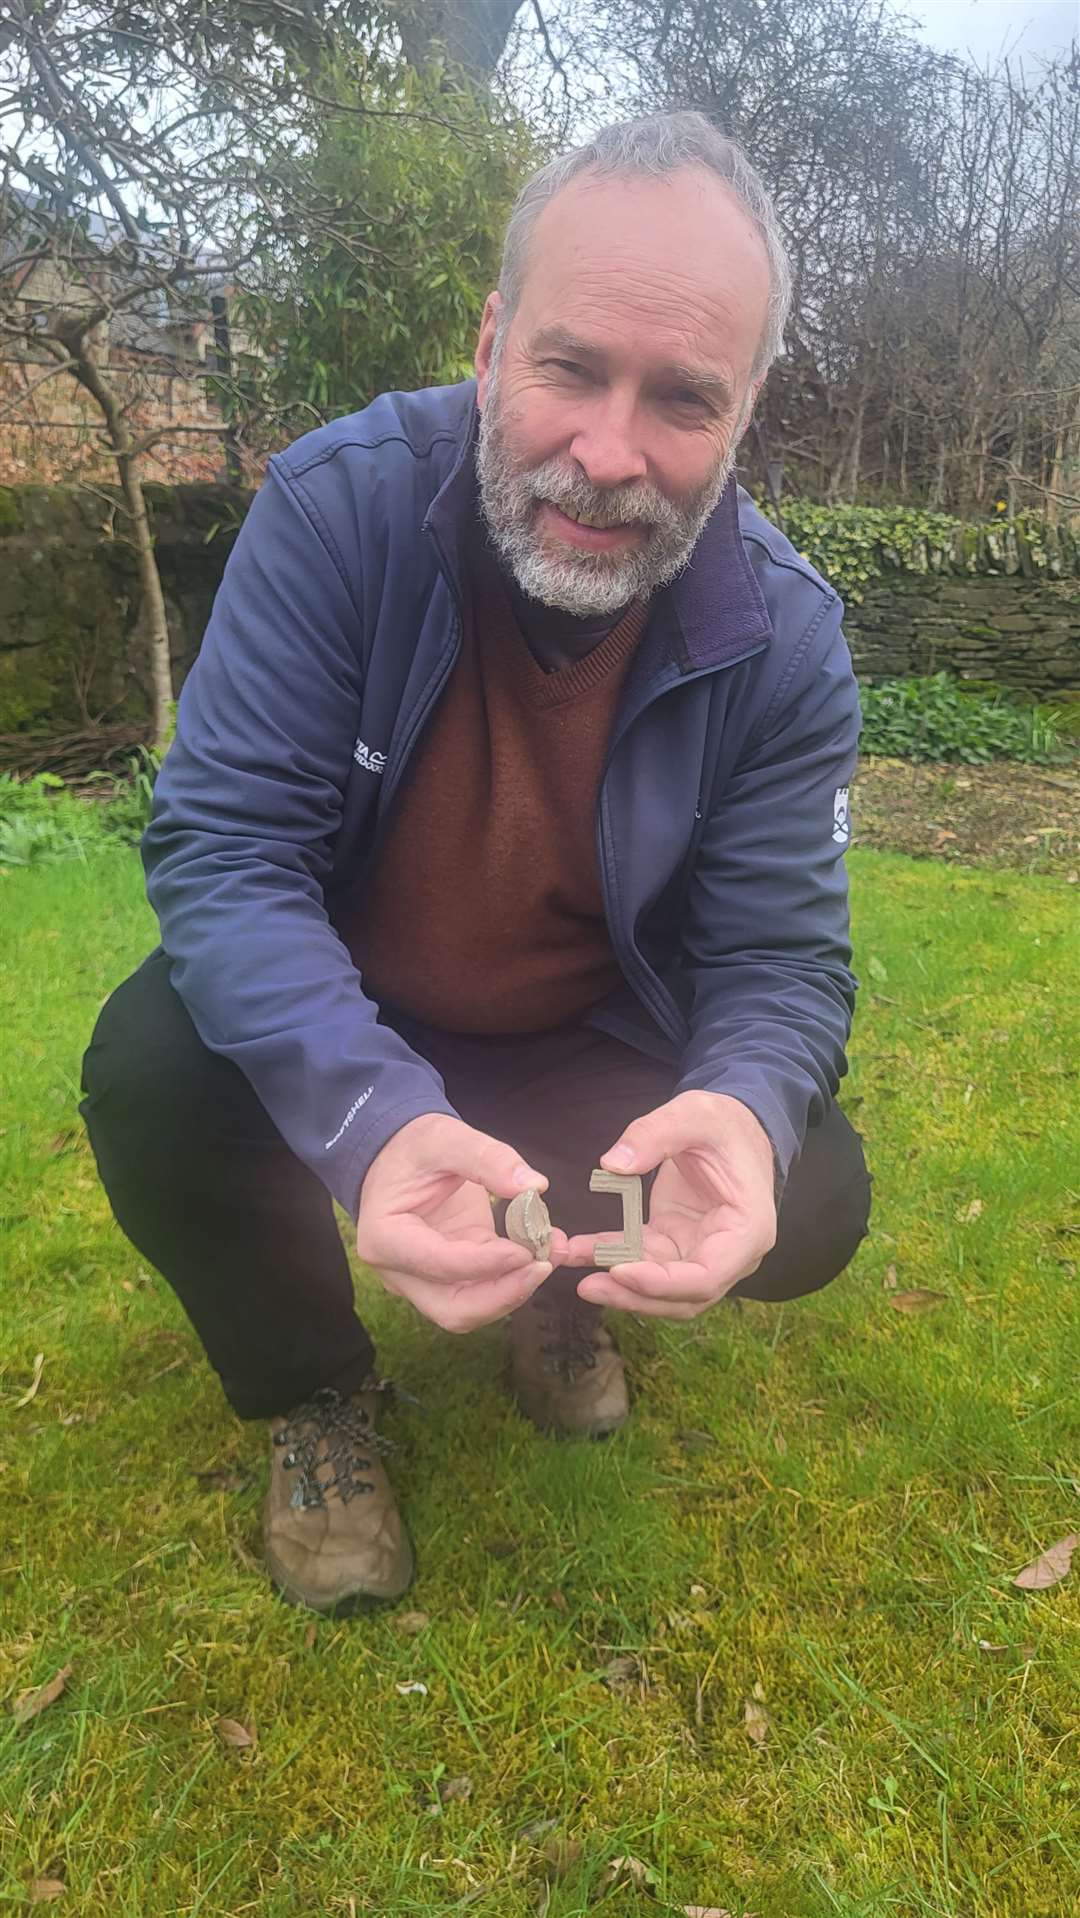 Derek Alexander with the finds. Picture: National Trust for Scotland